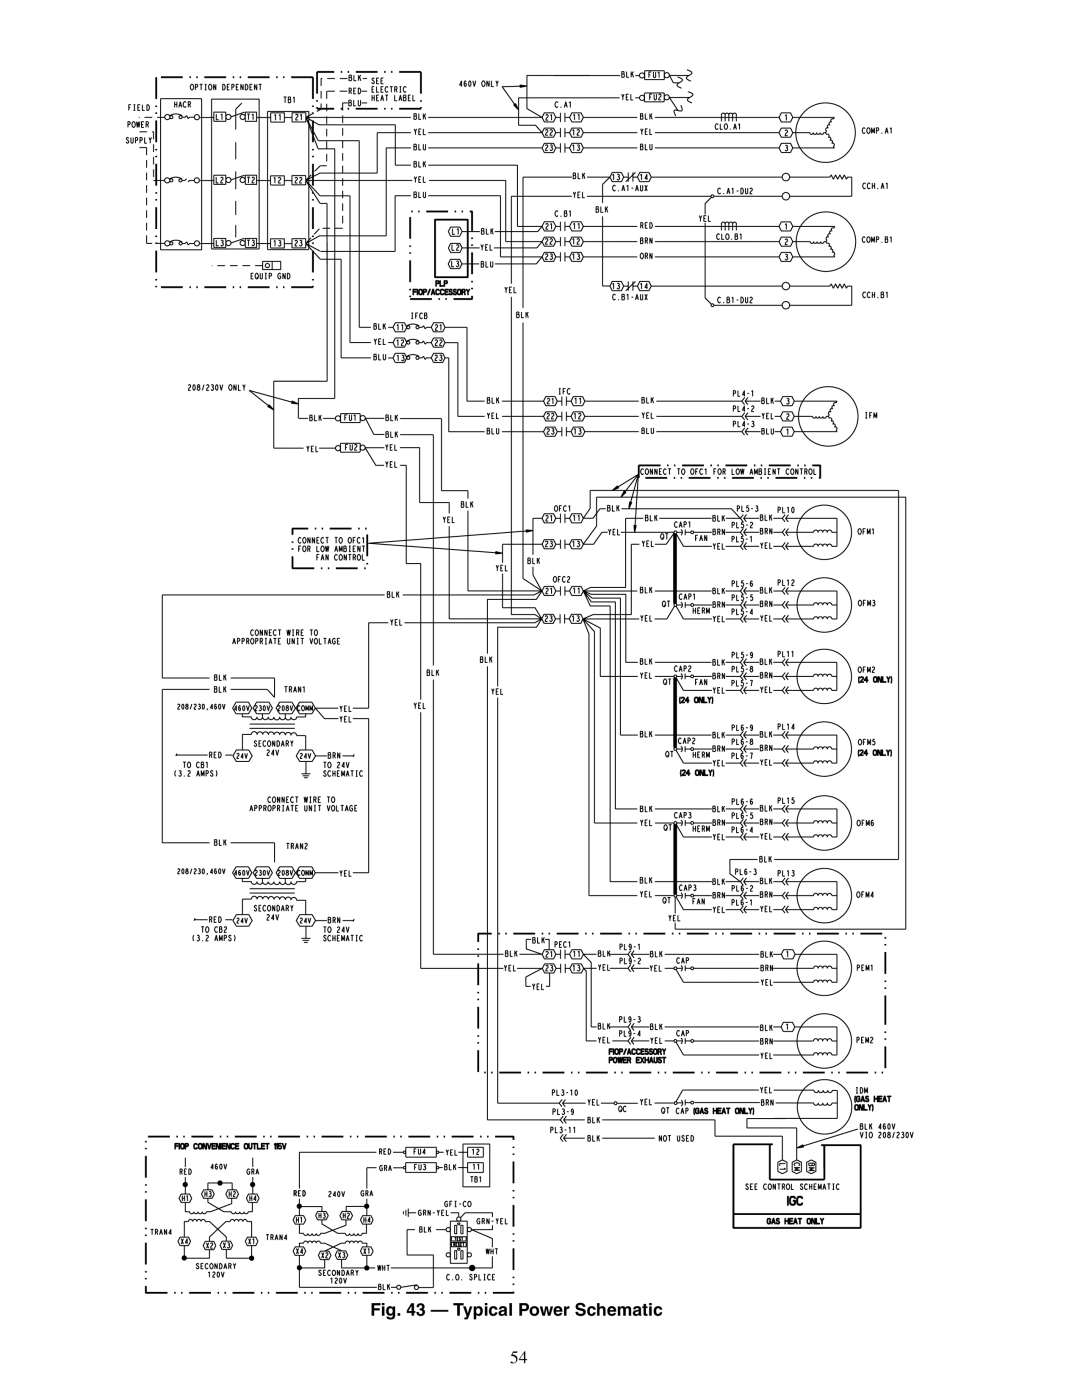 Carrier 48PG20-28 specifications Typical Power Schematic 